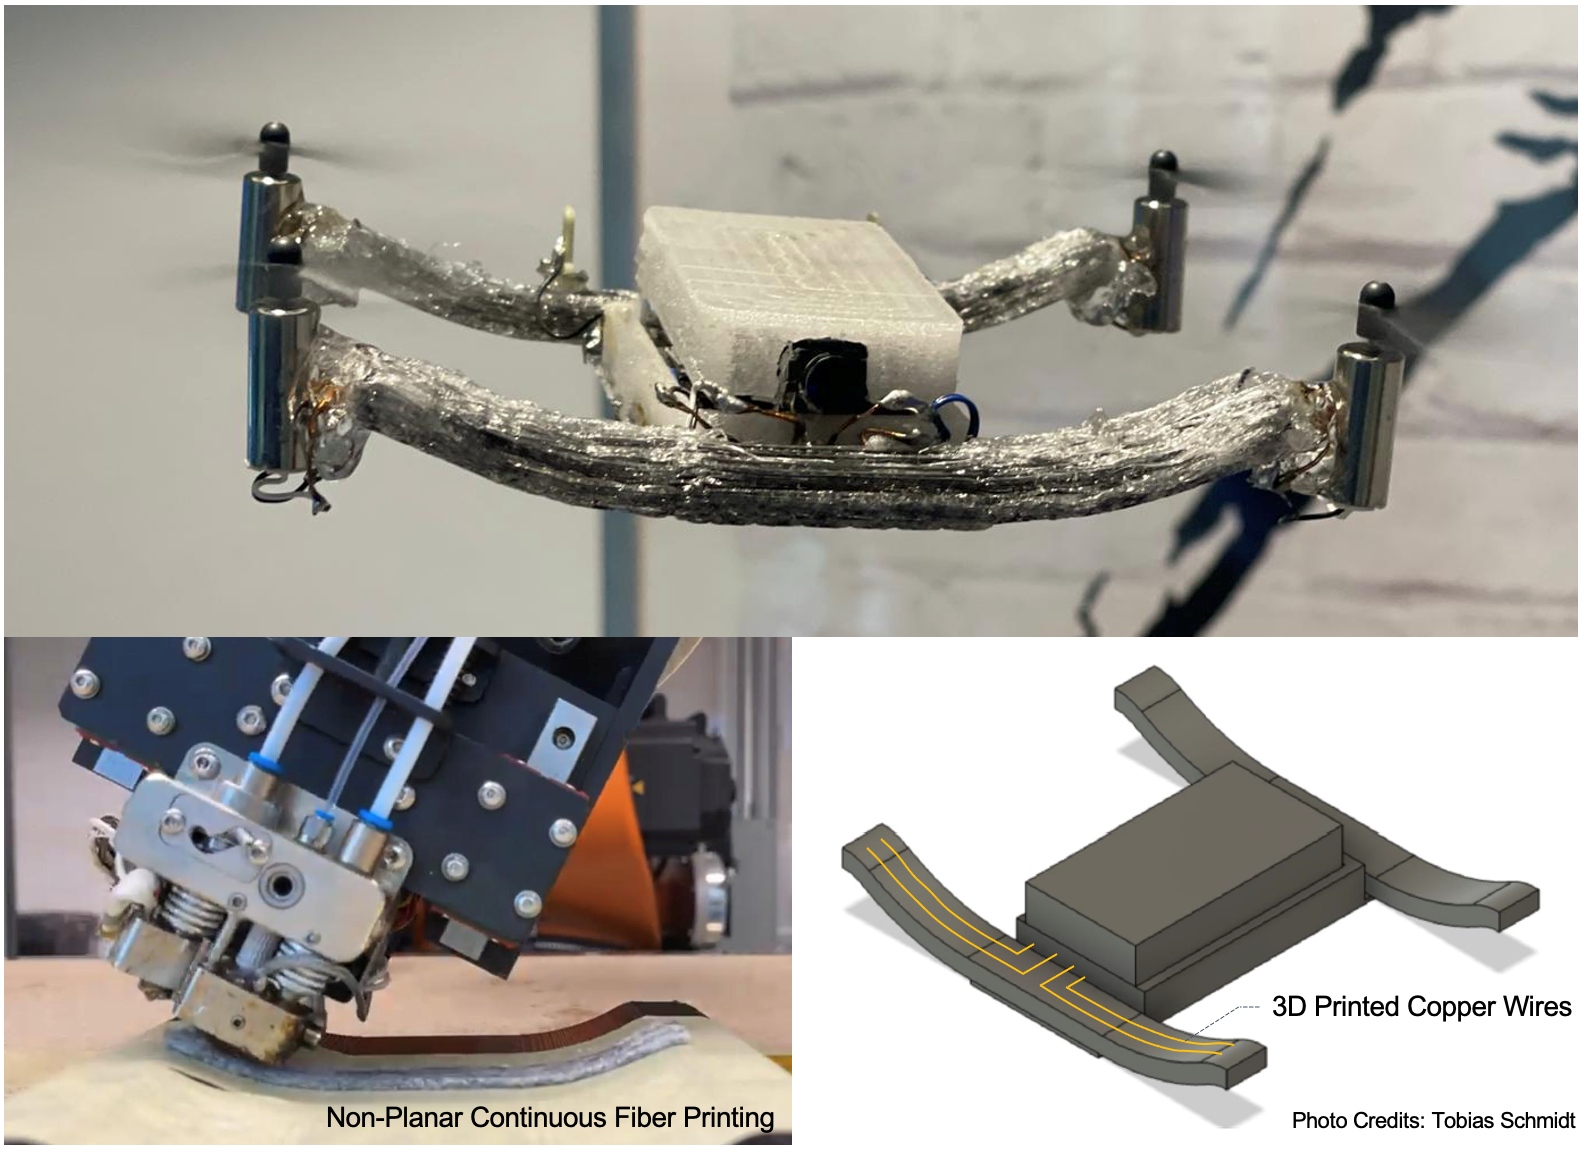 Multi-functional non-planar 3D printed parts with embedded copper